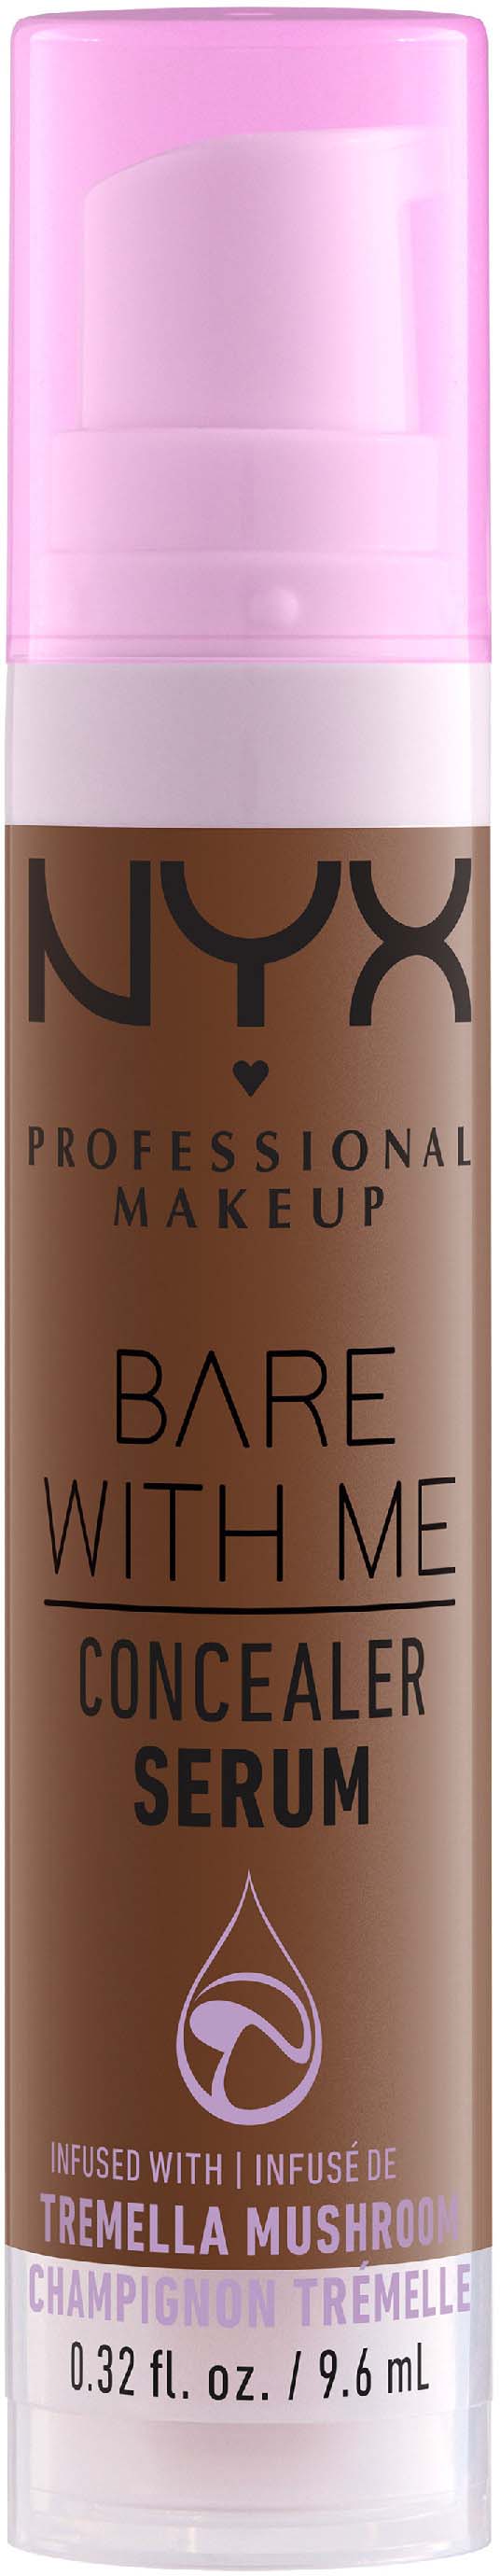 MAKEUP NYX With PROFESSIONAL Serum Rich Me Bare Concealer